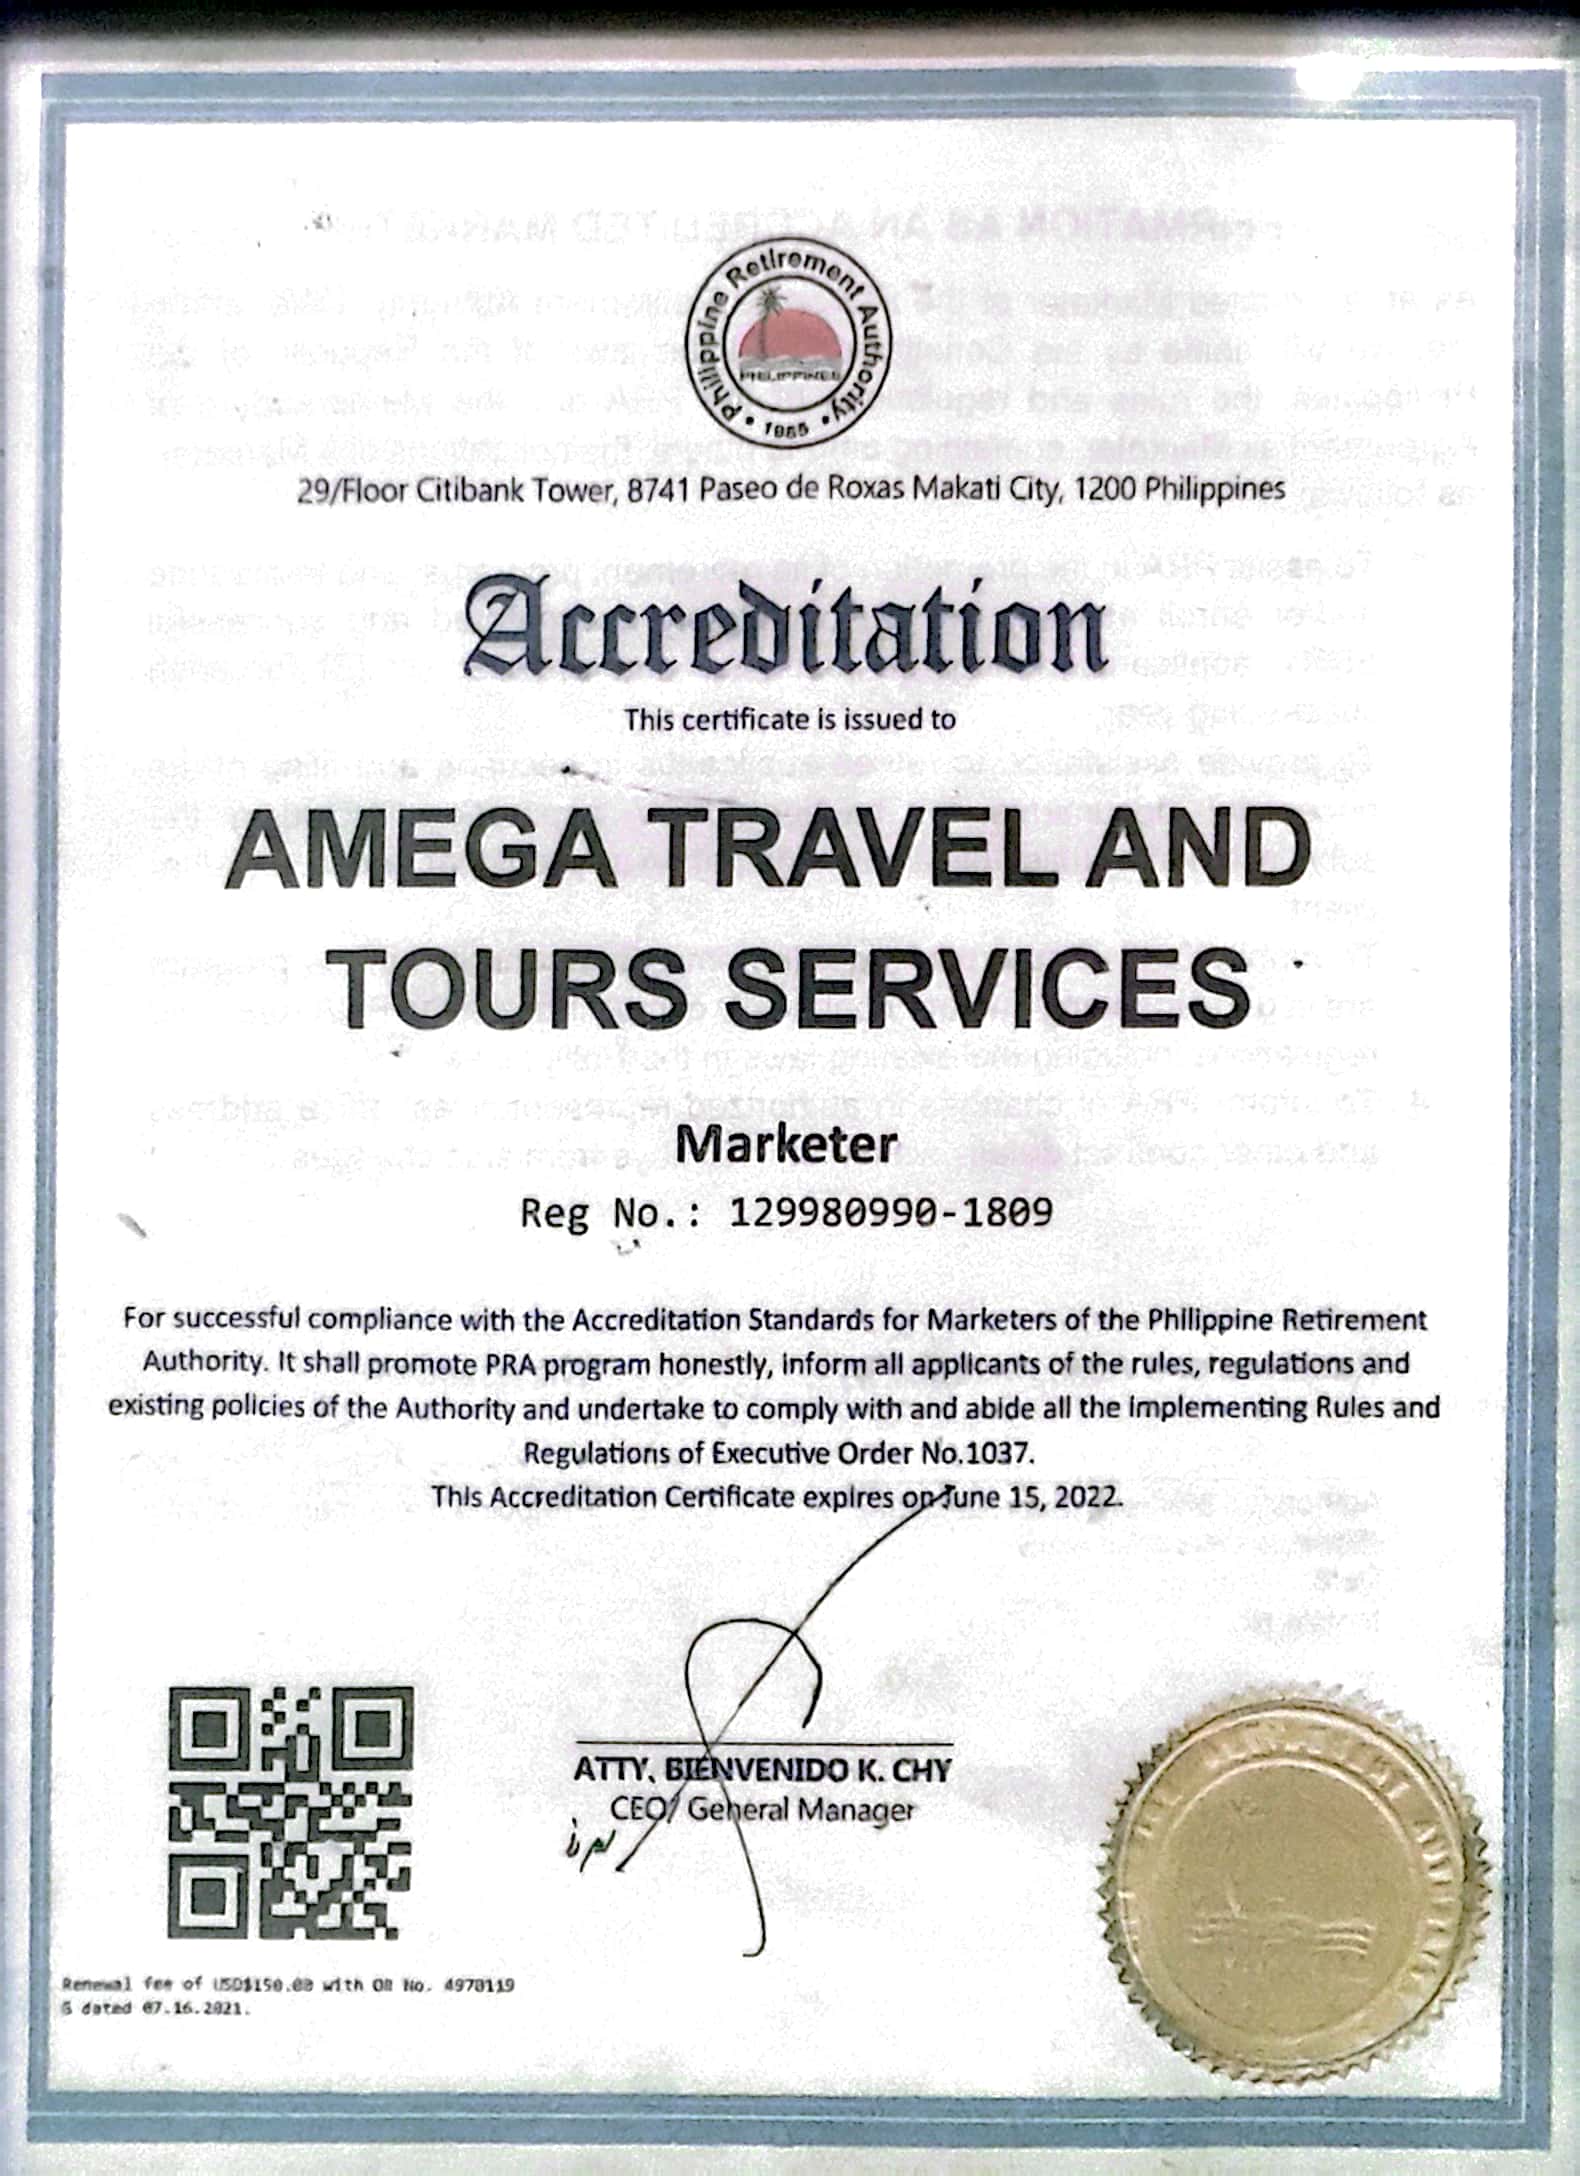 travel agency philippines sf